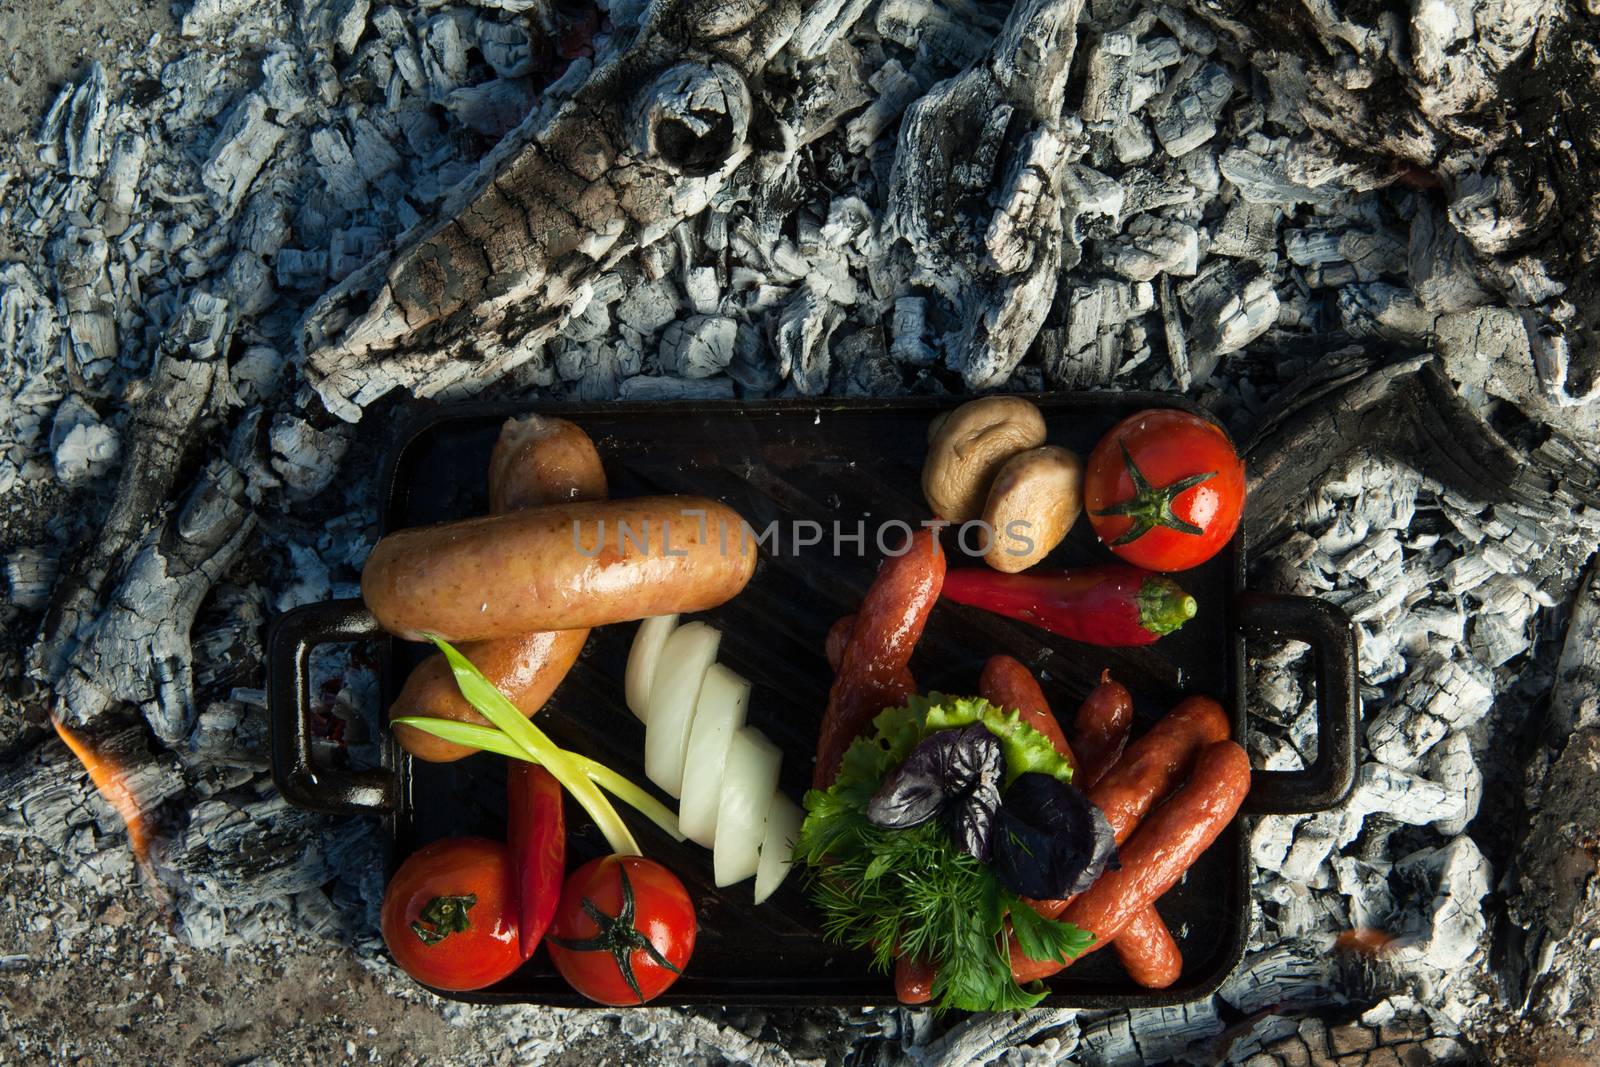 smoked sausages and tomatoes lie on charcoal. the dish is cooked and smoked on charcoal